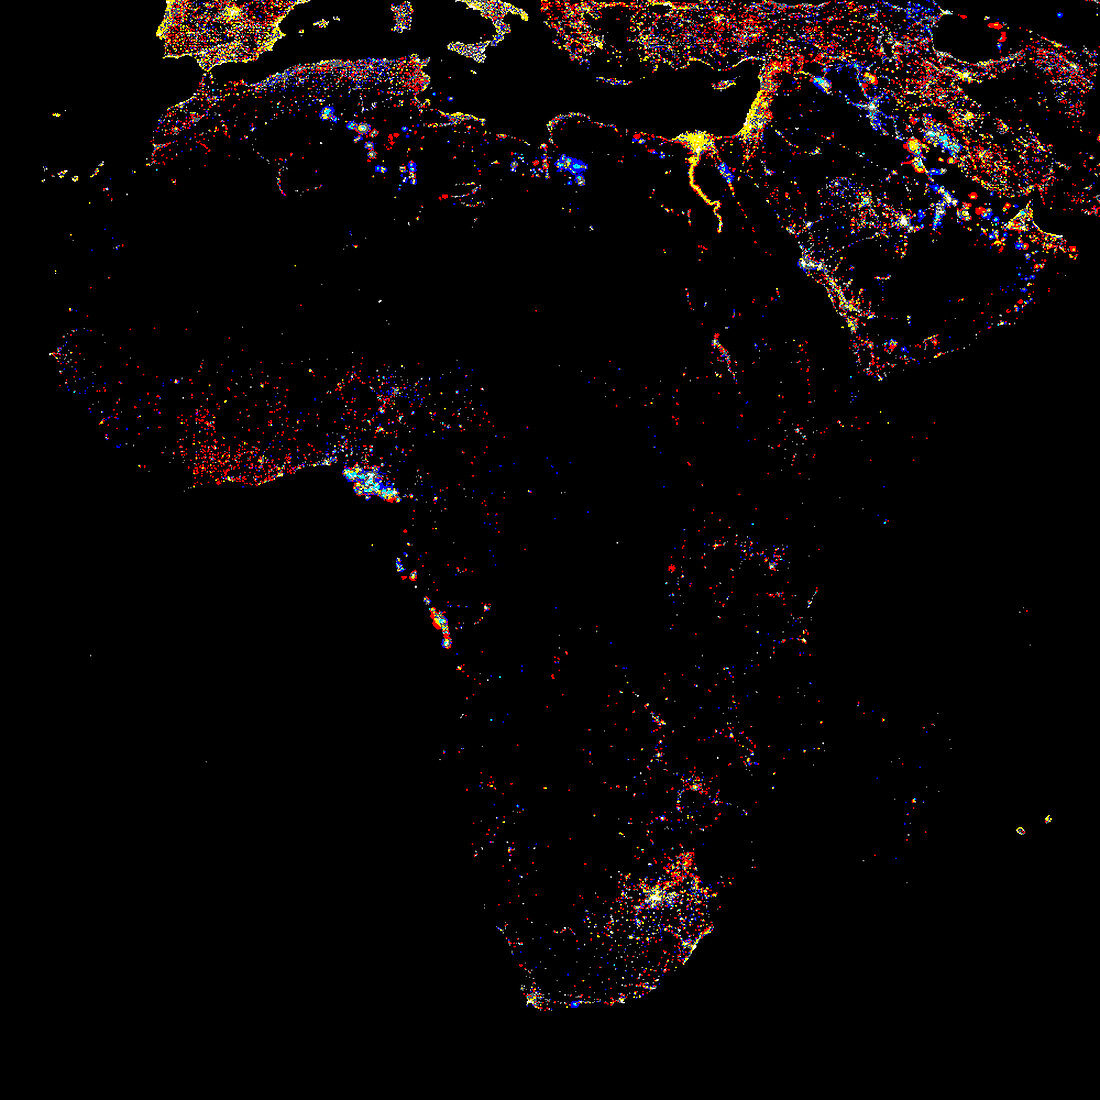 Africa at night,1993-2003 changes